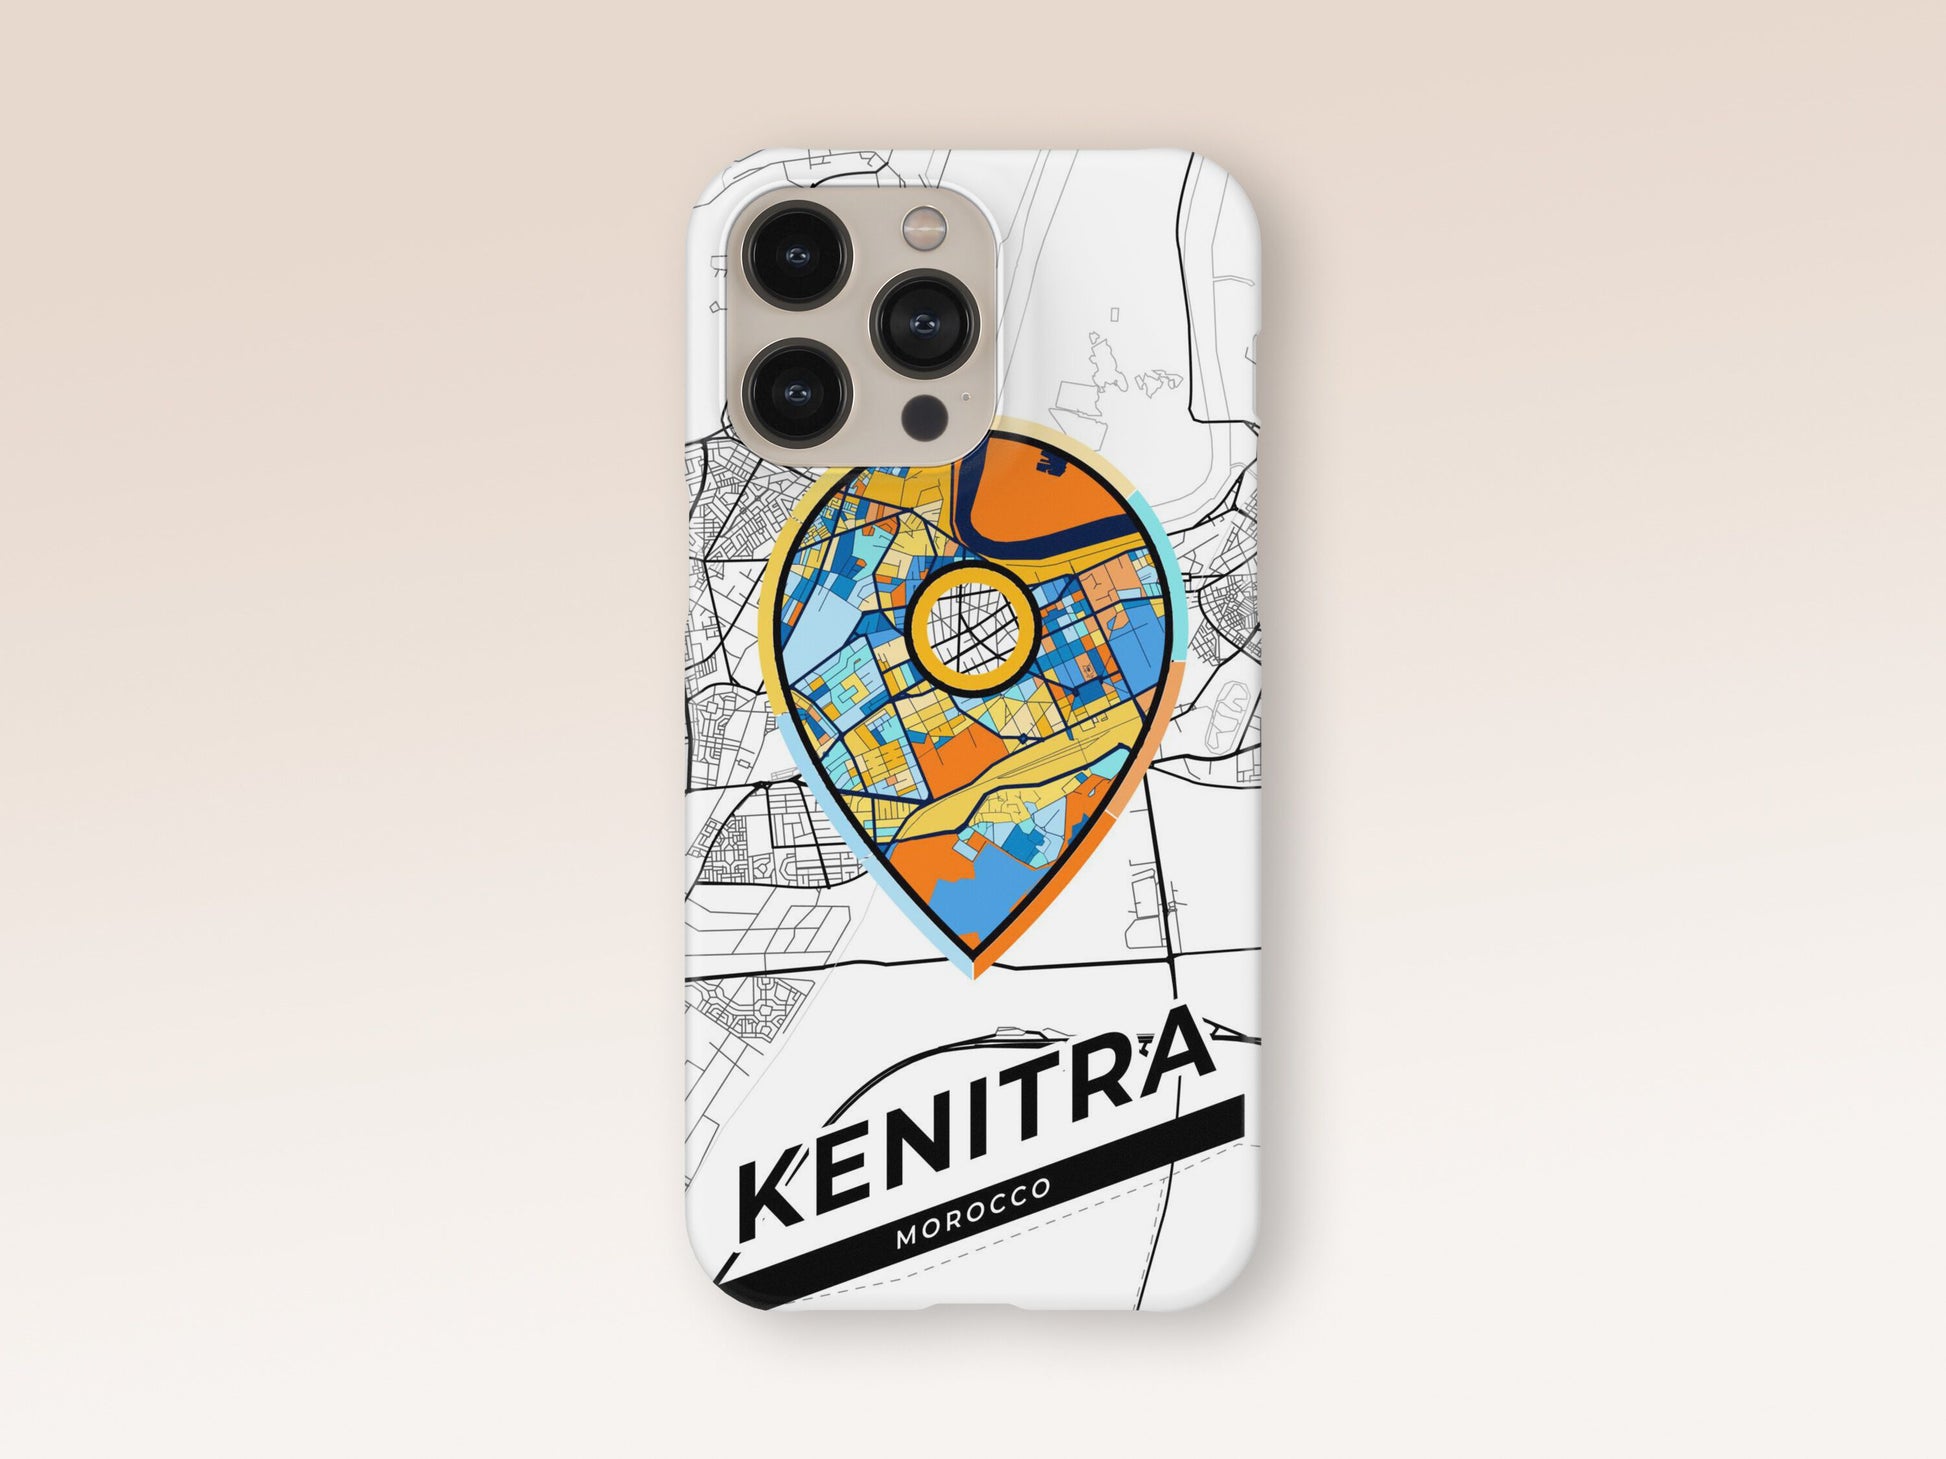 Kenitra Morocco slim phone case with colorful icon. Birthday, wedding or housewarming gift. Couple match cases. 1